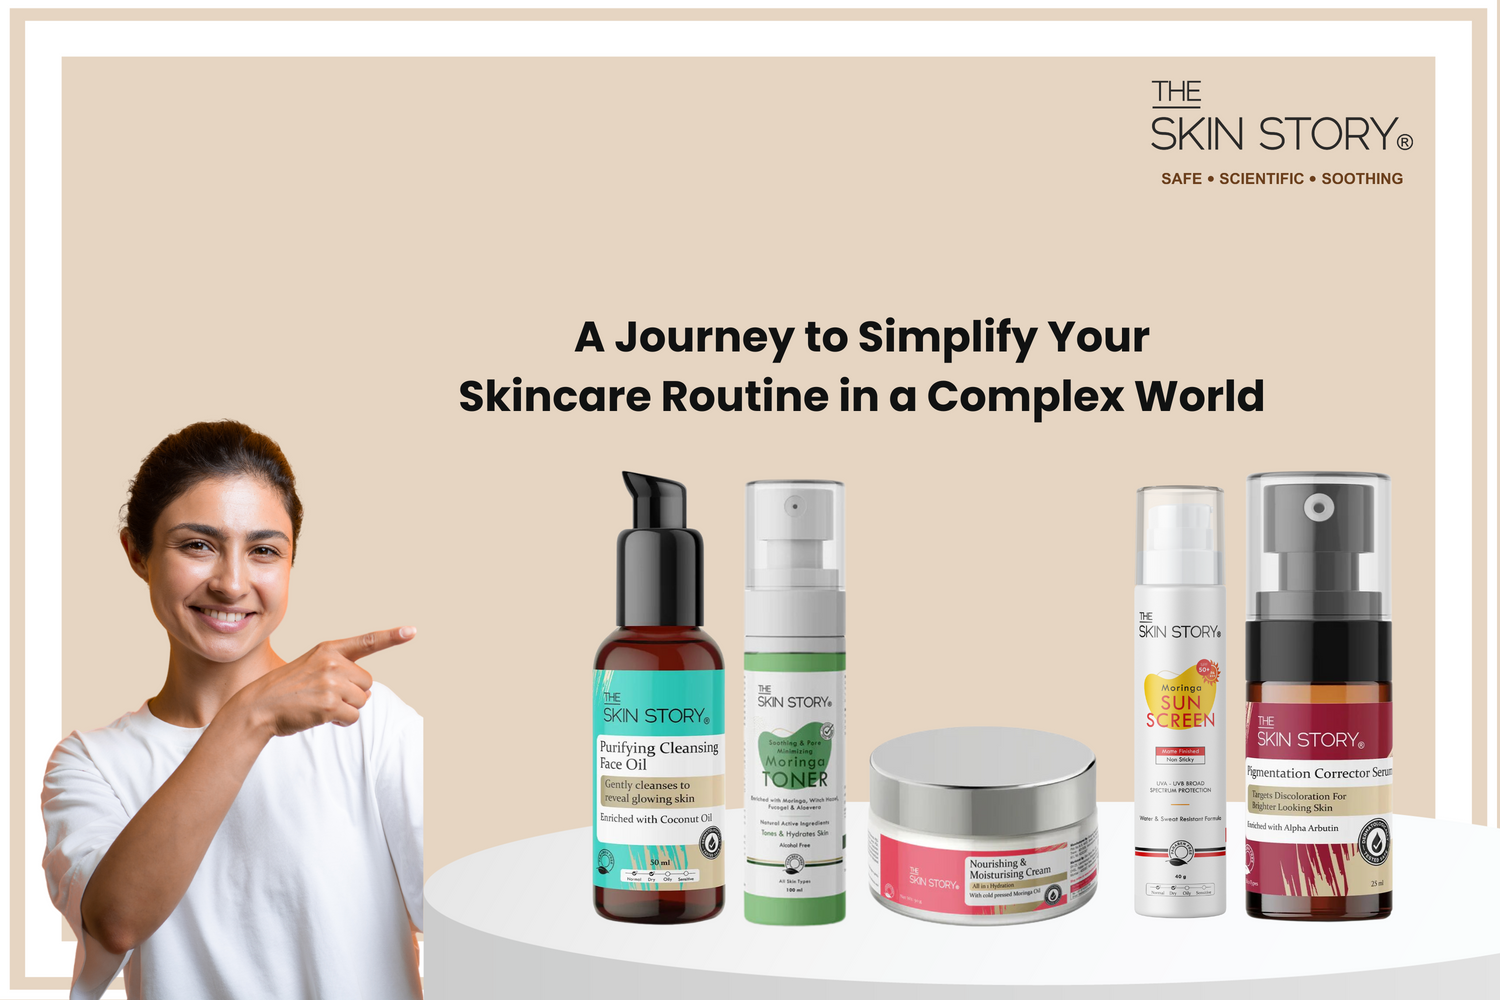 A Journey to Simplify Your Skincare Routine in a Complex World